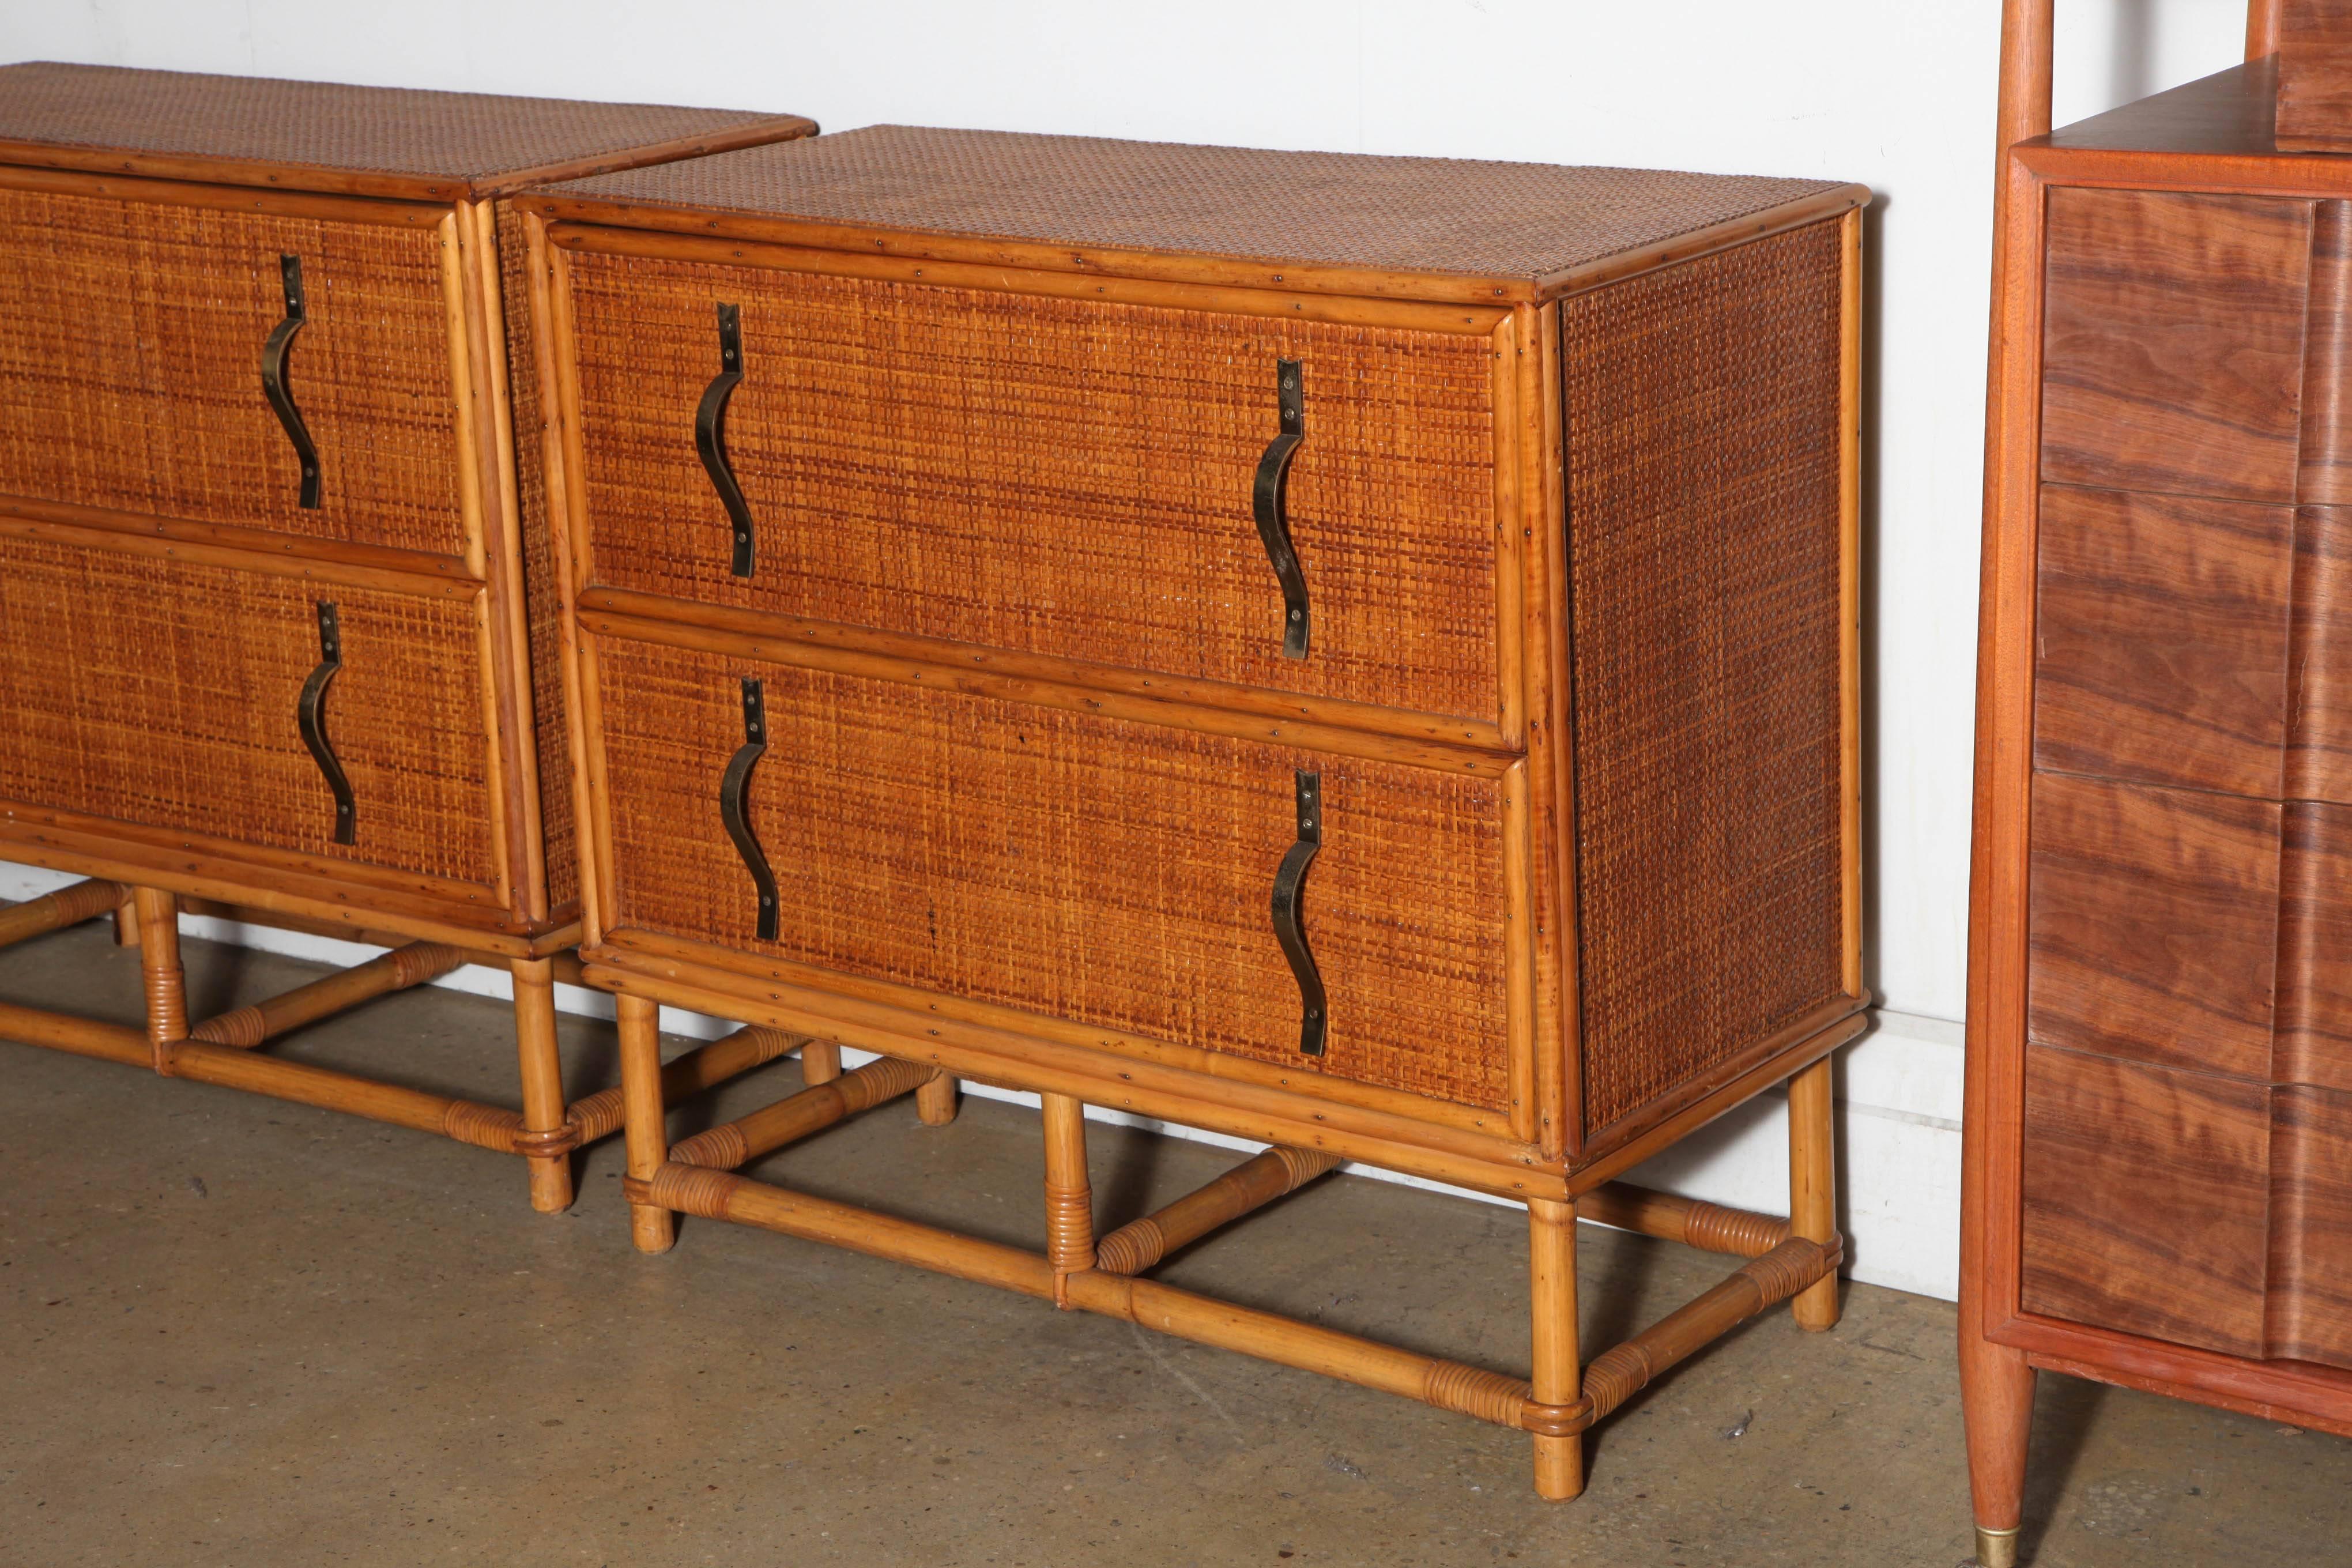 2 elegant late 1930's California Modern Paul T. Frankl rectangular Bamboo and Rattan Dressers or large Nightstands. with 2 deep drawers, an open rectangular Bamboo framework base and vertical Brass Banner Ribbon pulls 